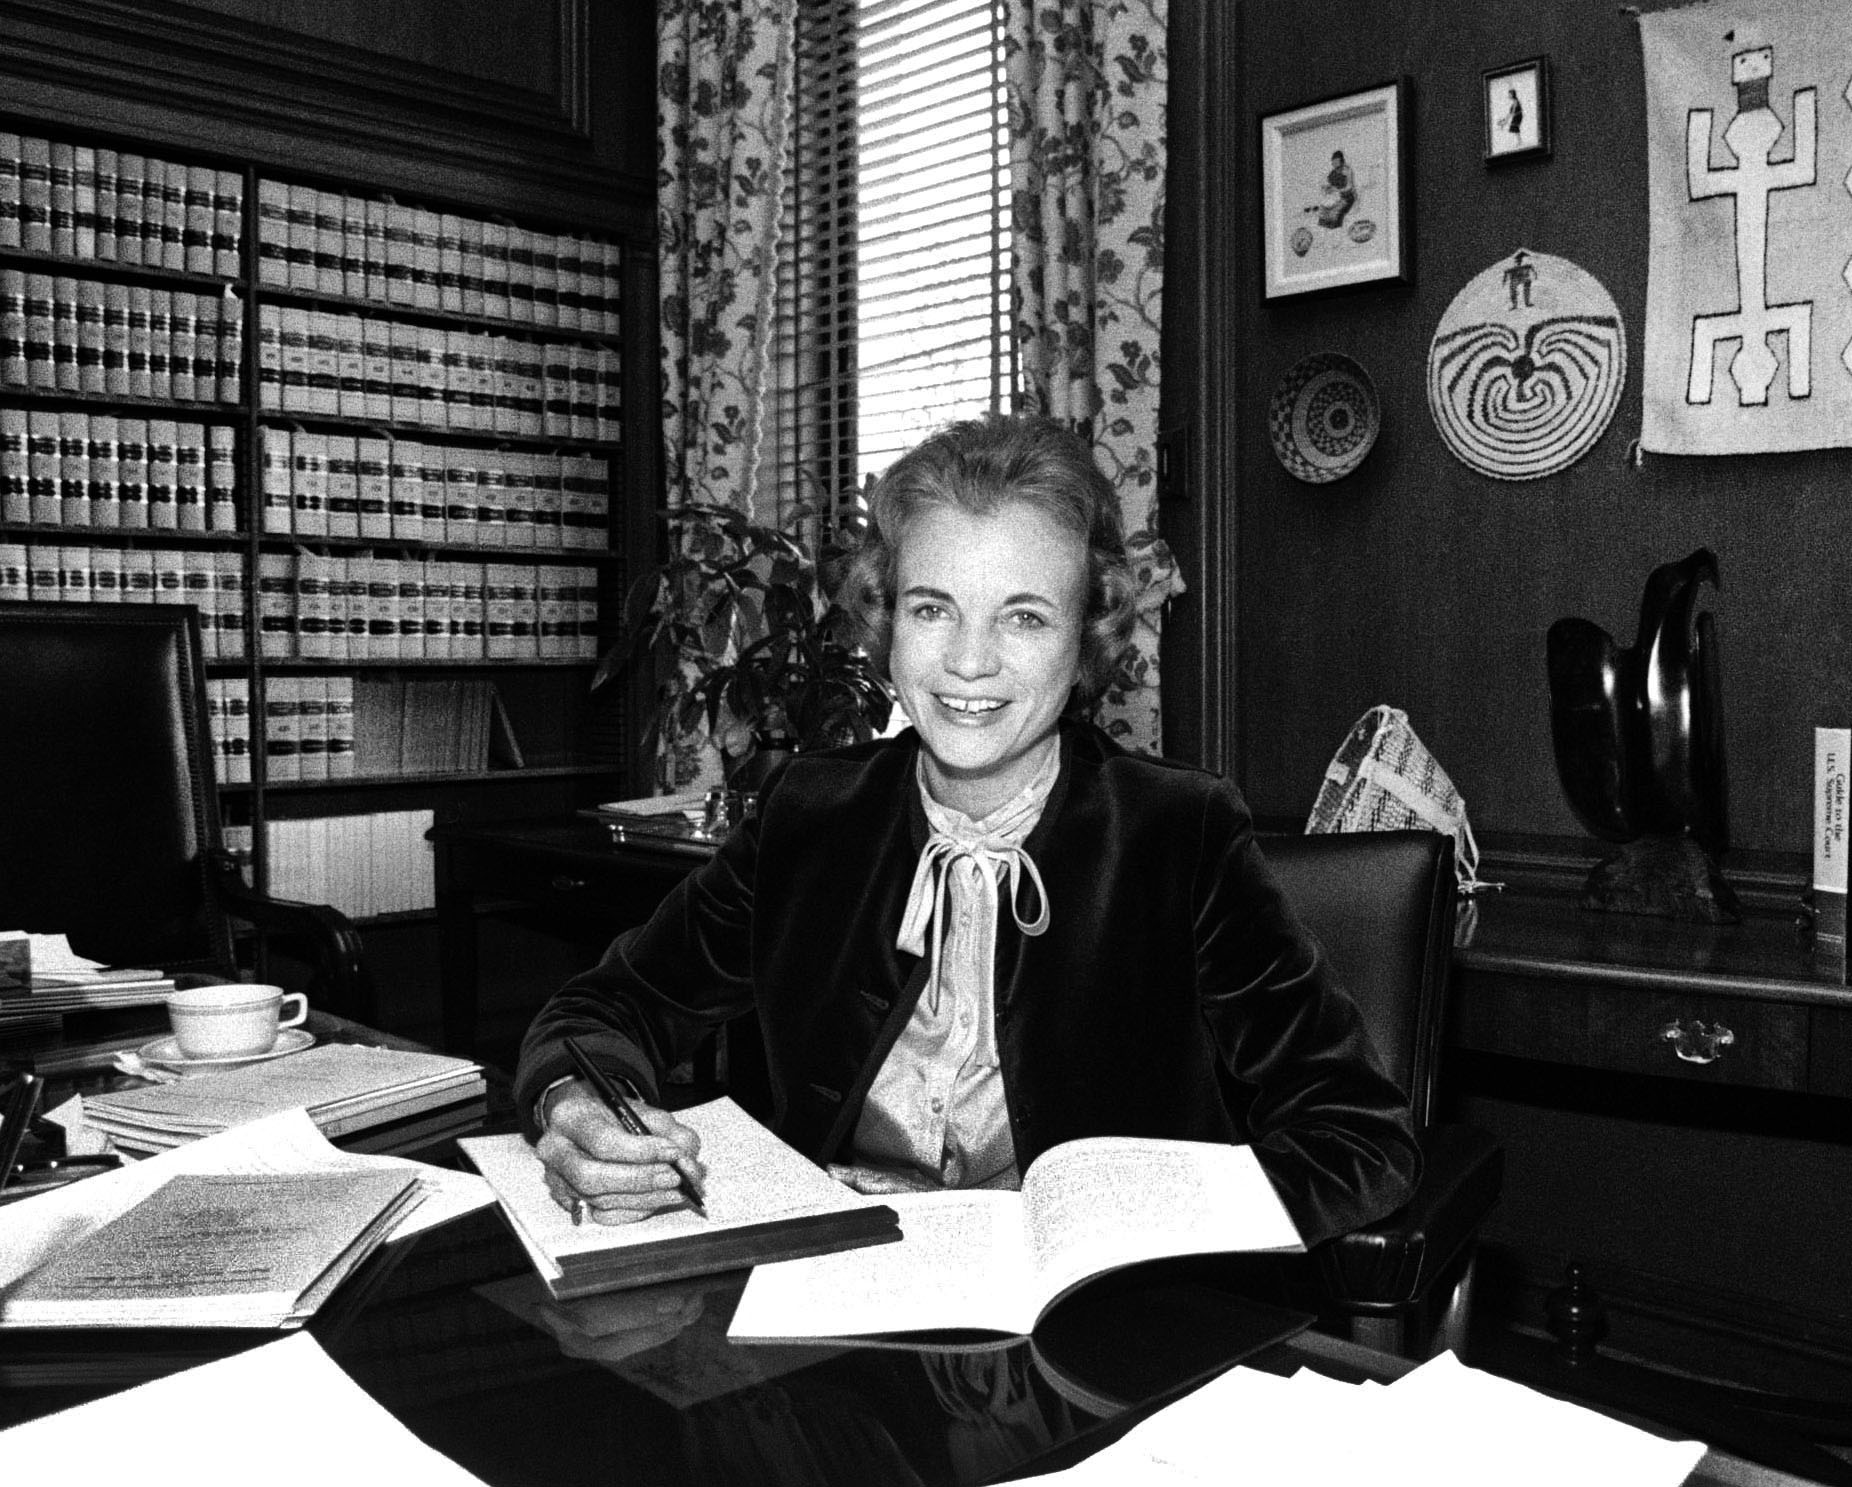 Justice O'Conner in her chambers at the U.S. Supreme Court, October 5, 1981, her first photo at work.